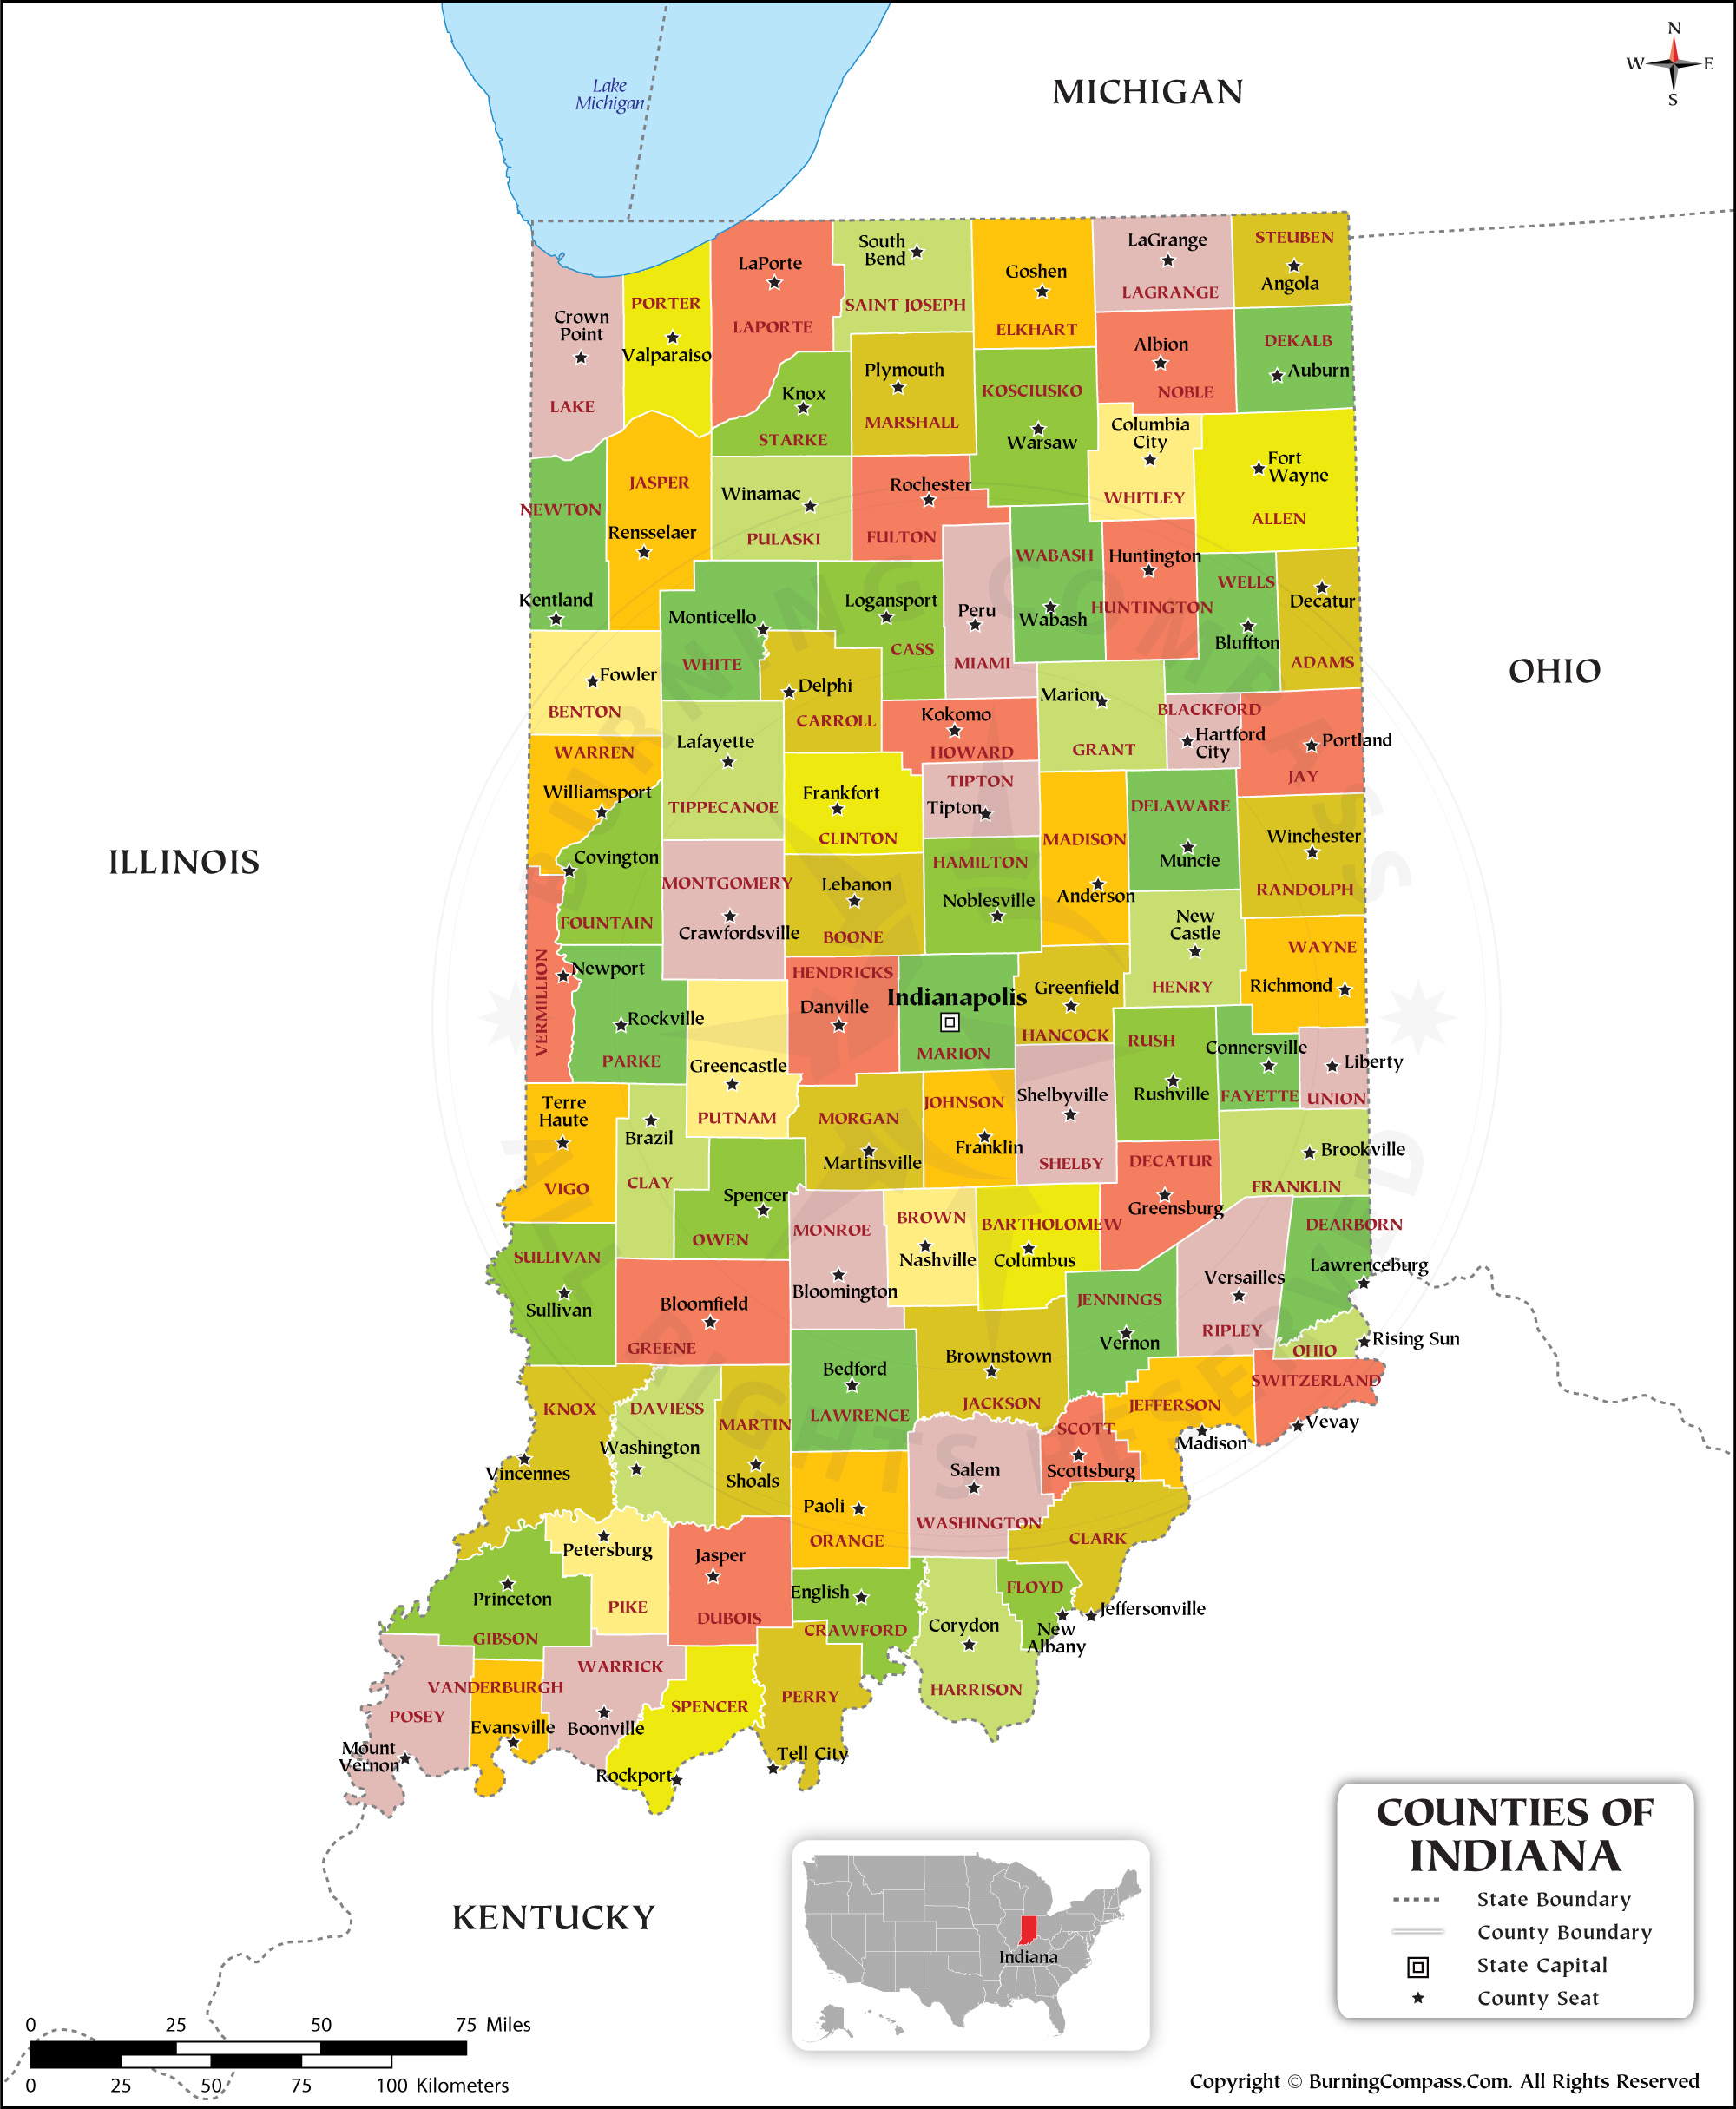 Buy Indiana County Map Online, Purchase Indiana County Map